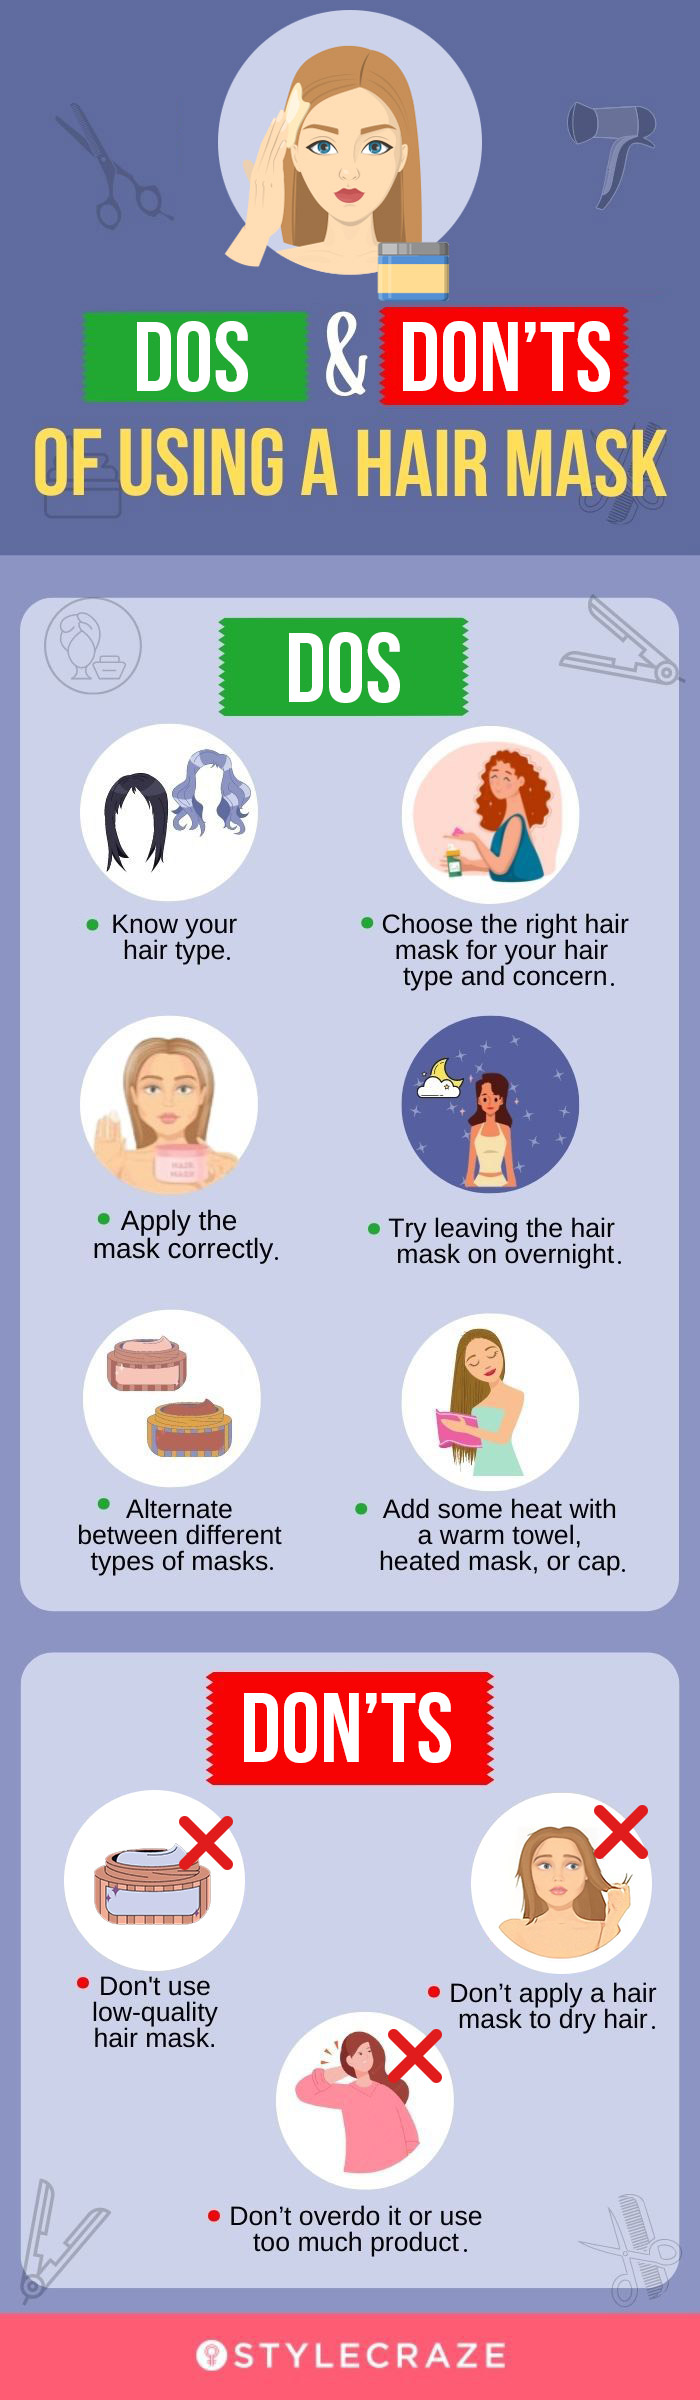 How To Use A Hair Mask + 4 Benefits Of Using It